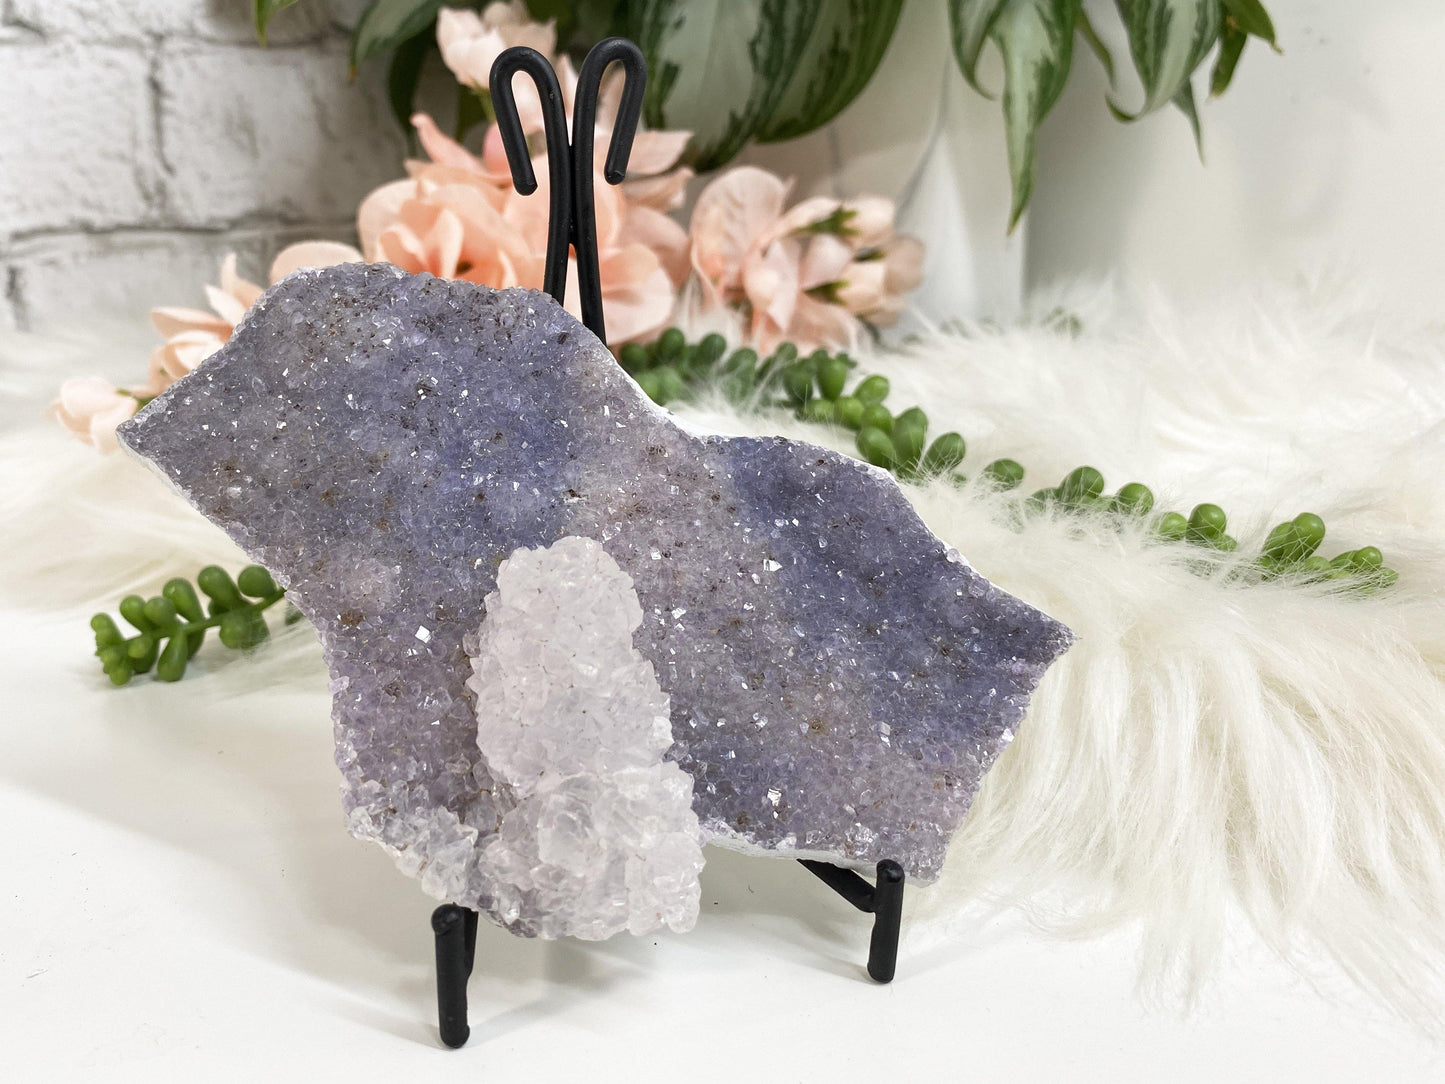 Easel metal display stands. These simple metal stands are perfect for propping up slabs or display crystals that usually just sit flat.